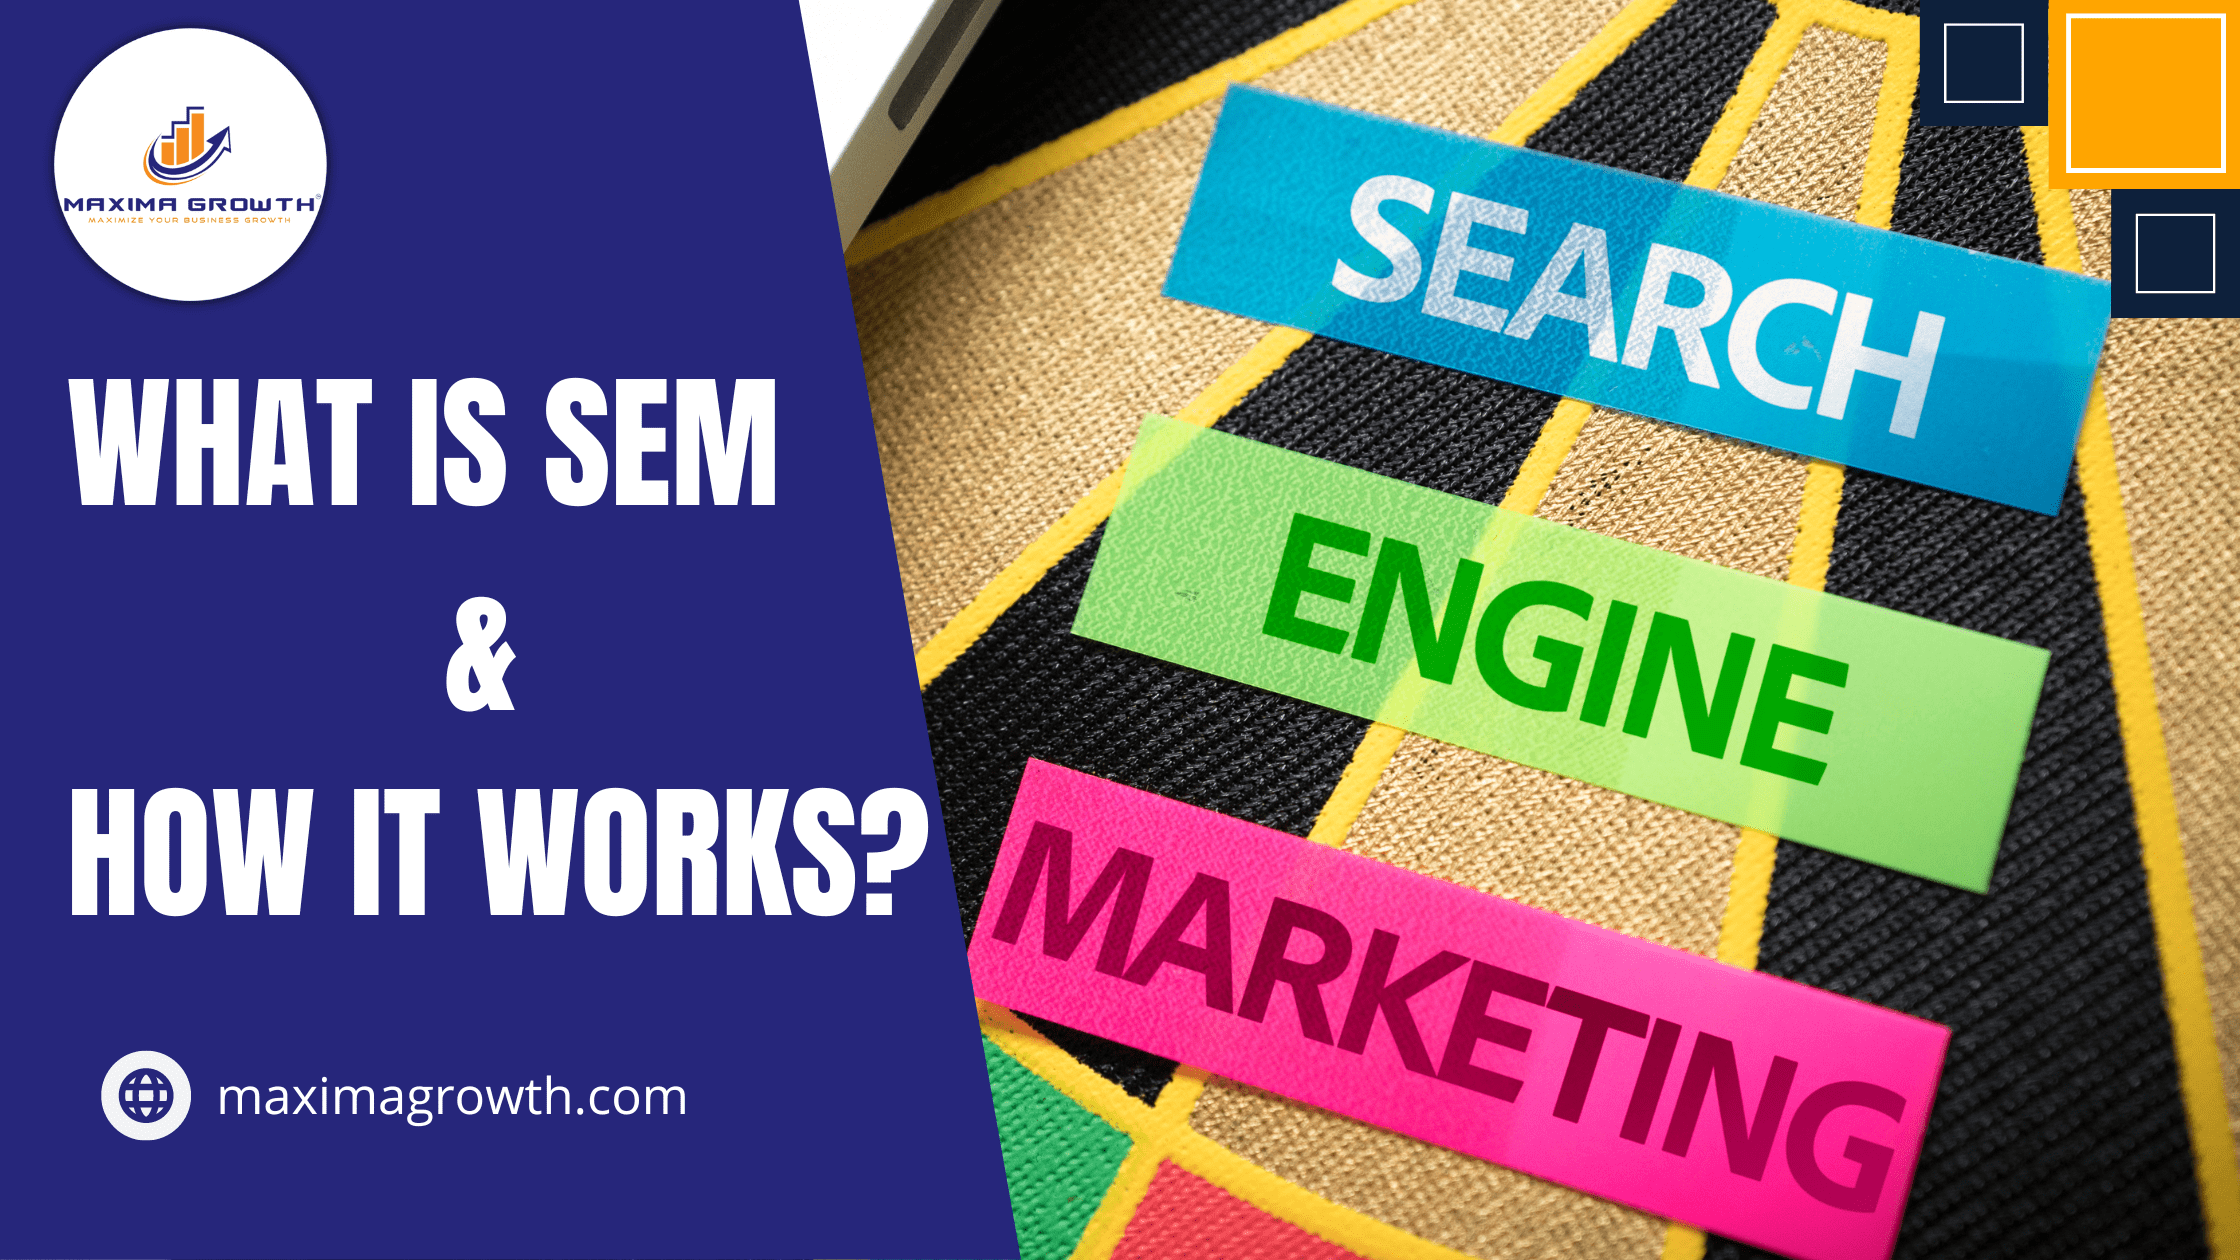 What is Search Engine Marketing & How it Works?